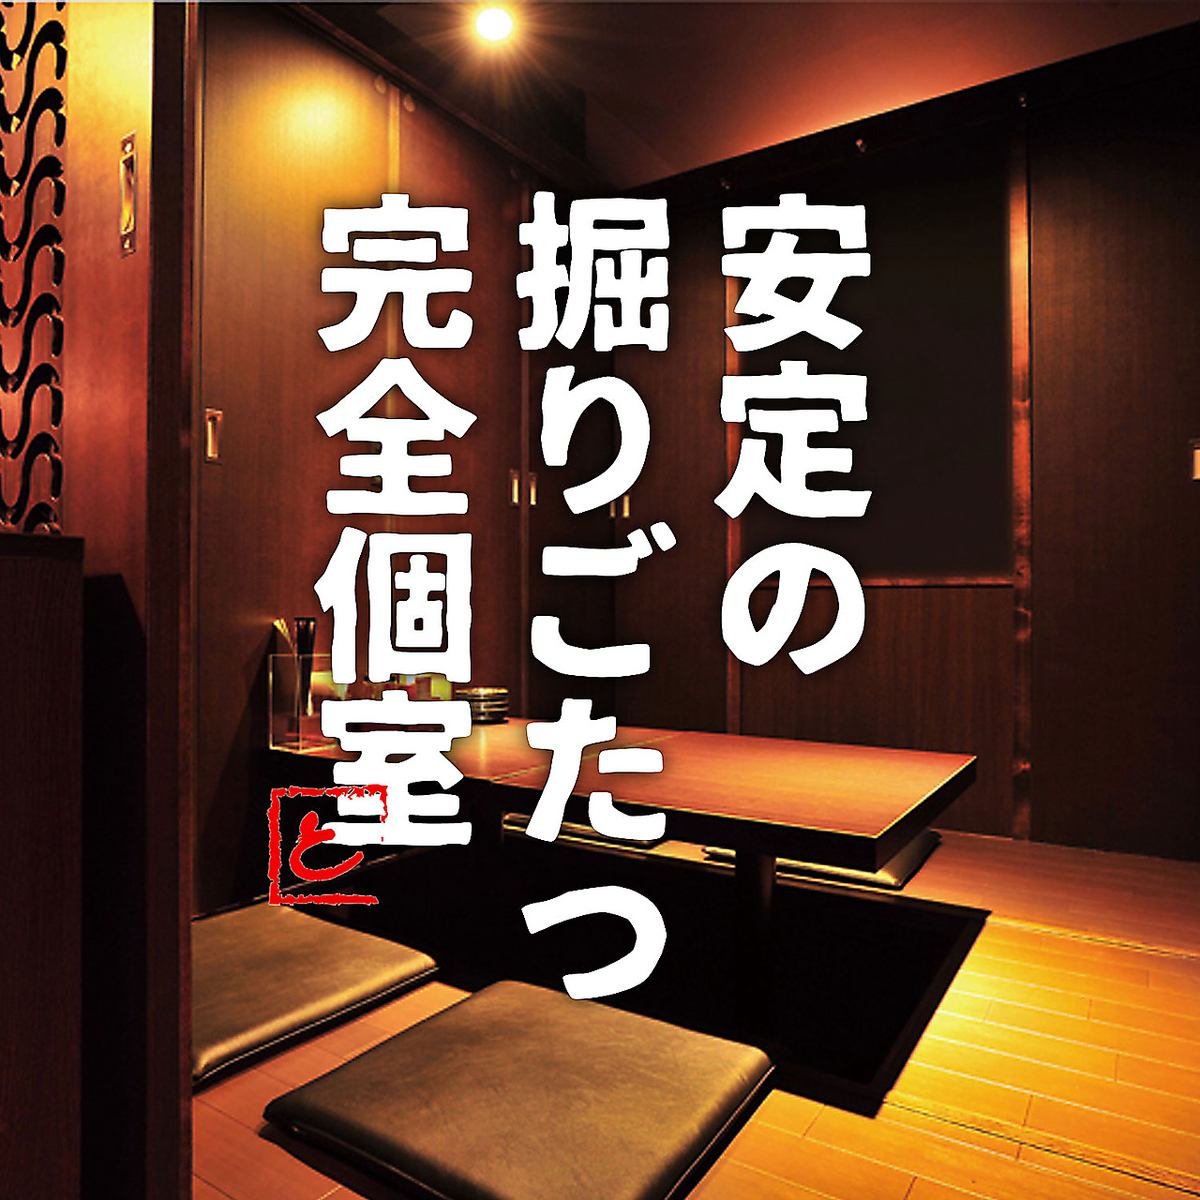 You can enjoy a relaxing meal in a private room with a sunken kotatsu table.